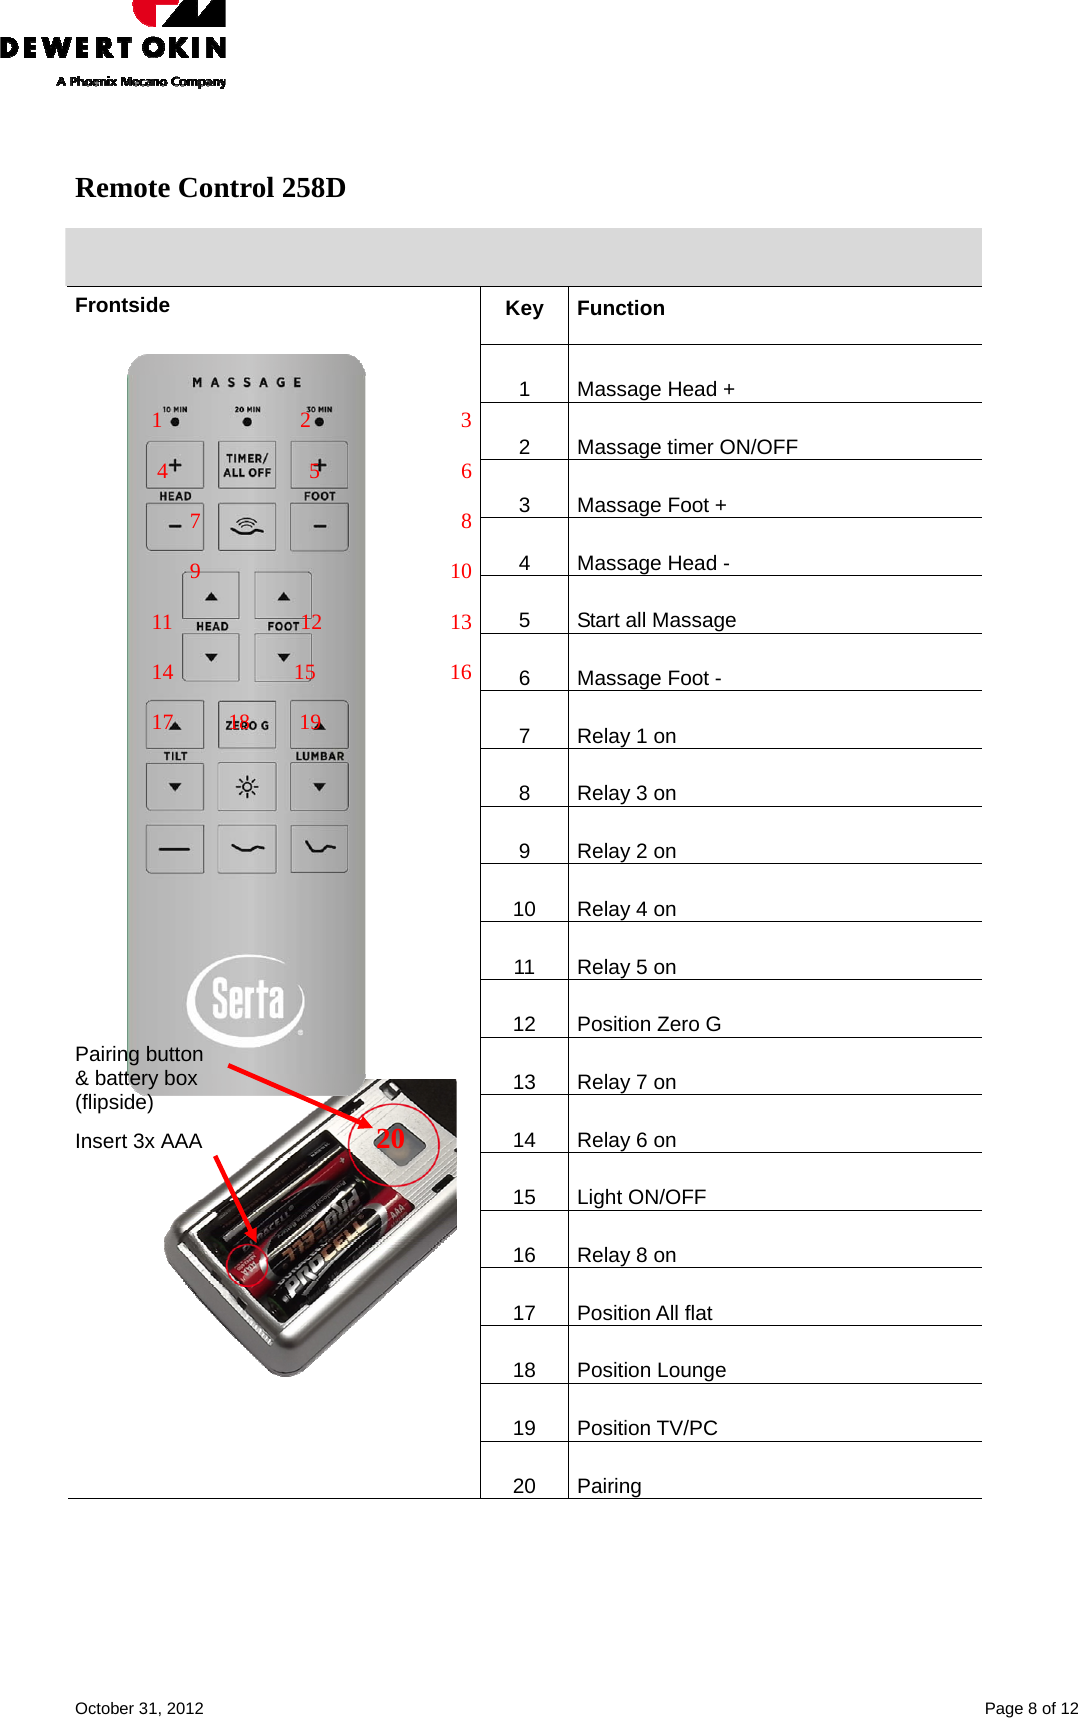    October 31, 2012    Page 8 of 12  Remote Control 258D   Key Function 1  Massage Head + 2  Massage timer ON/OFF 3  Massage Foot + 4  Massage Head - 5  Start all Massage 6  Massage Foot - 7  Relay 1 on 8  Relay 3 on 9  Relay 2 on 10  Relay 4 on 11  Relay 5 on 12  Position Zero G 13  Relay 7 on 14  Relay 6 on 15 Light ON/OFF 16  Relay 8 on 17 Position All flat 18 Position Lounge 19 Position TV/PC Frontside                  1           2            3                  4                      5                      6                      7                        8                       9                      10               11                  12                  13               14         15          16                17          18         19           Pairing button  &amp; battery box  (flipside)  Insert 3x AAA                              20        20 Pairing   